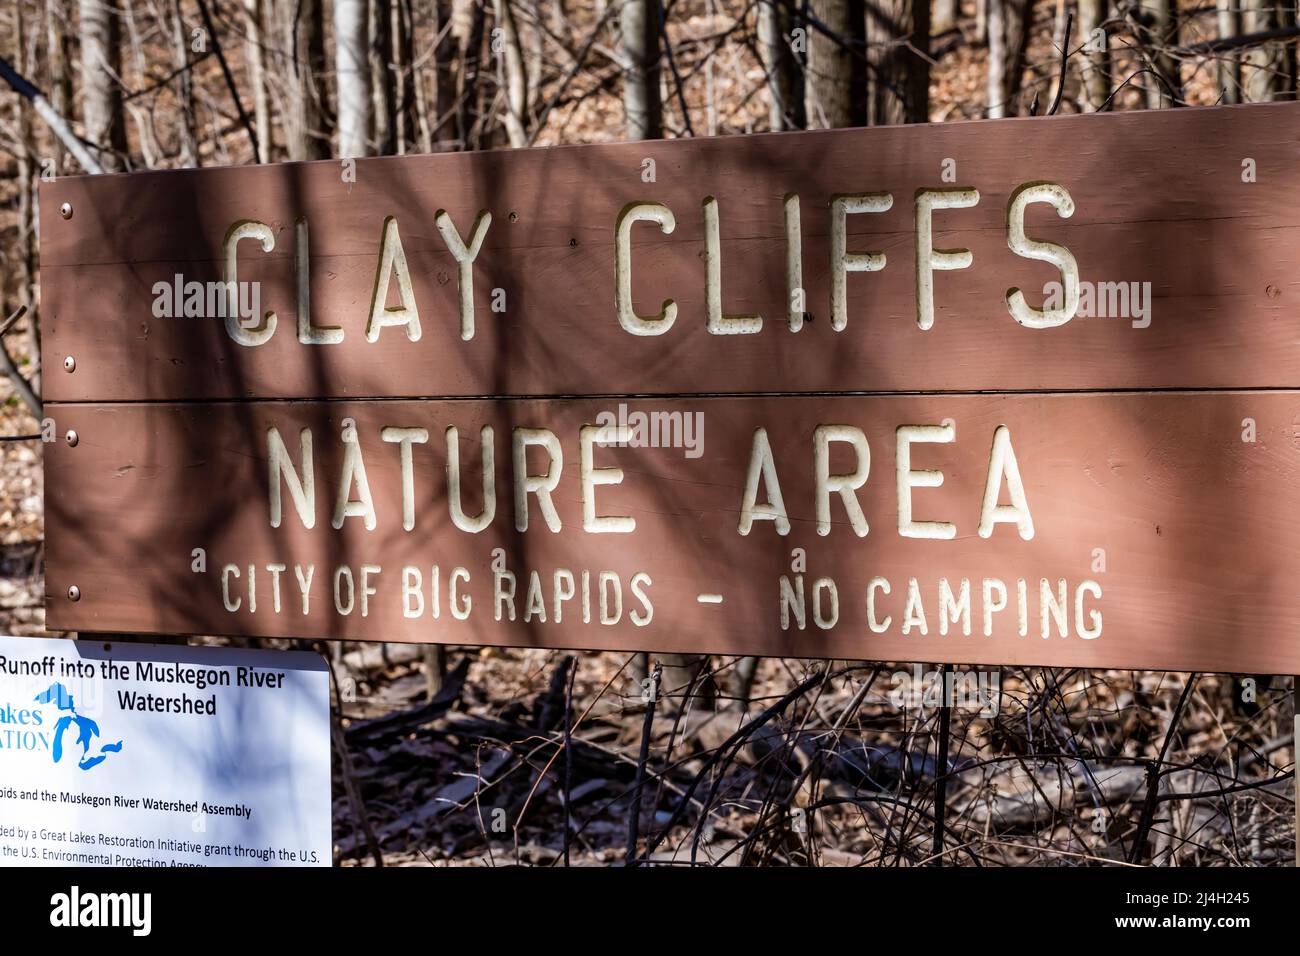 Entrance sign for Clay Cliffs Nature Area in Big Rapids, Michigan, USA Stock Photo